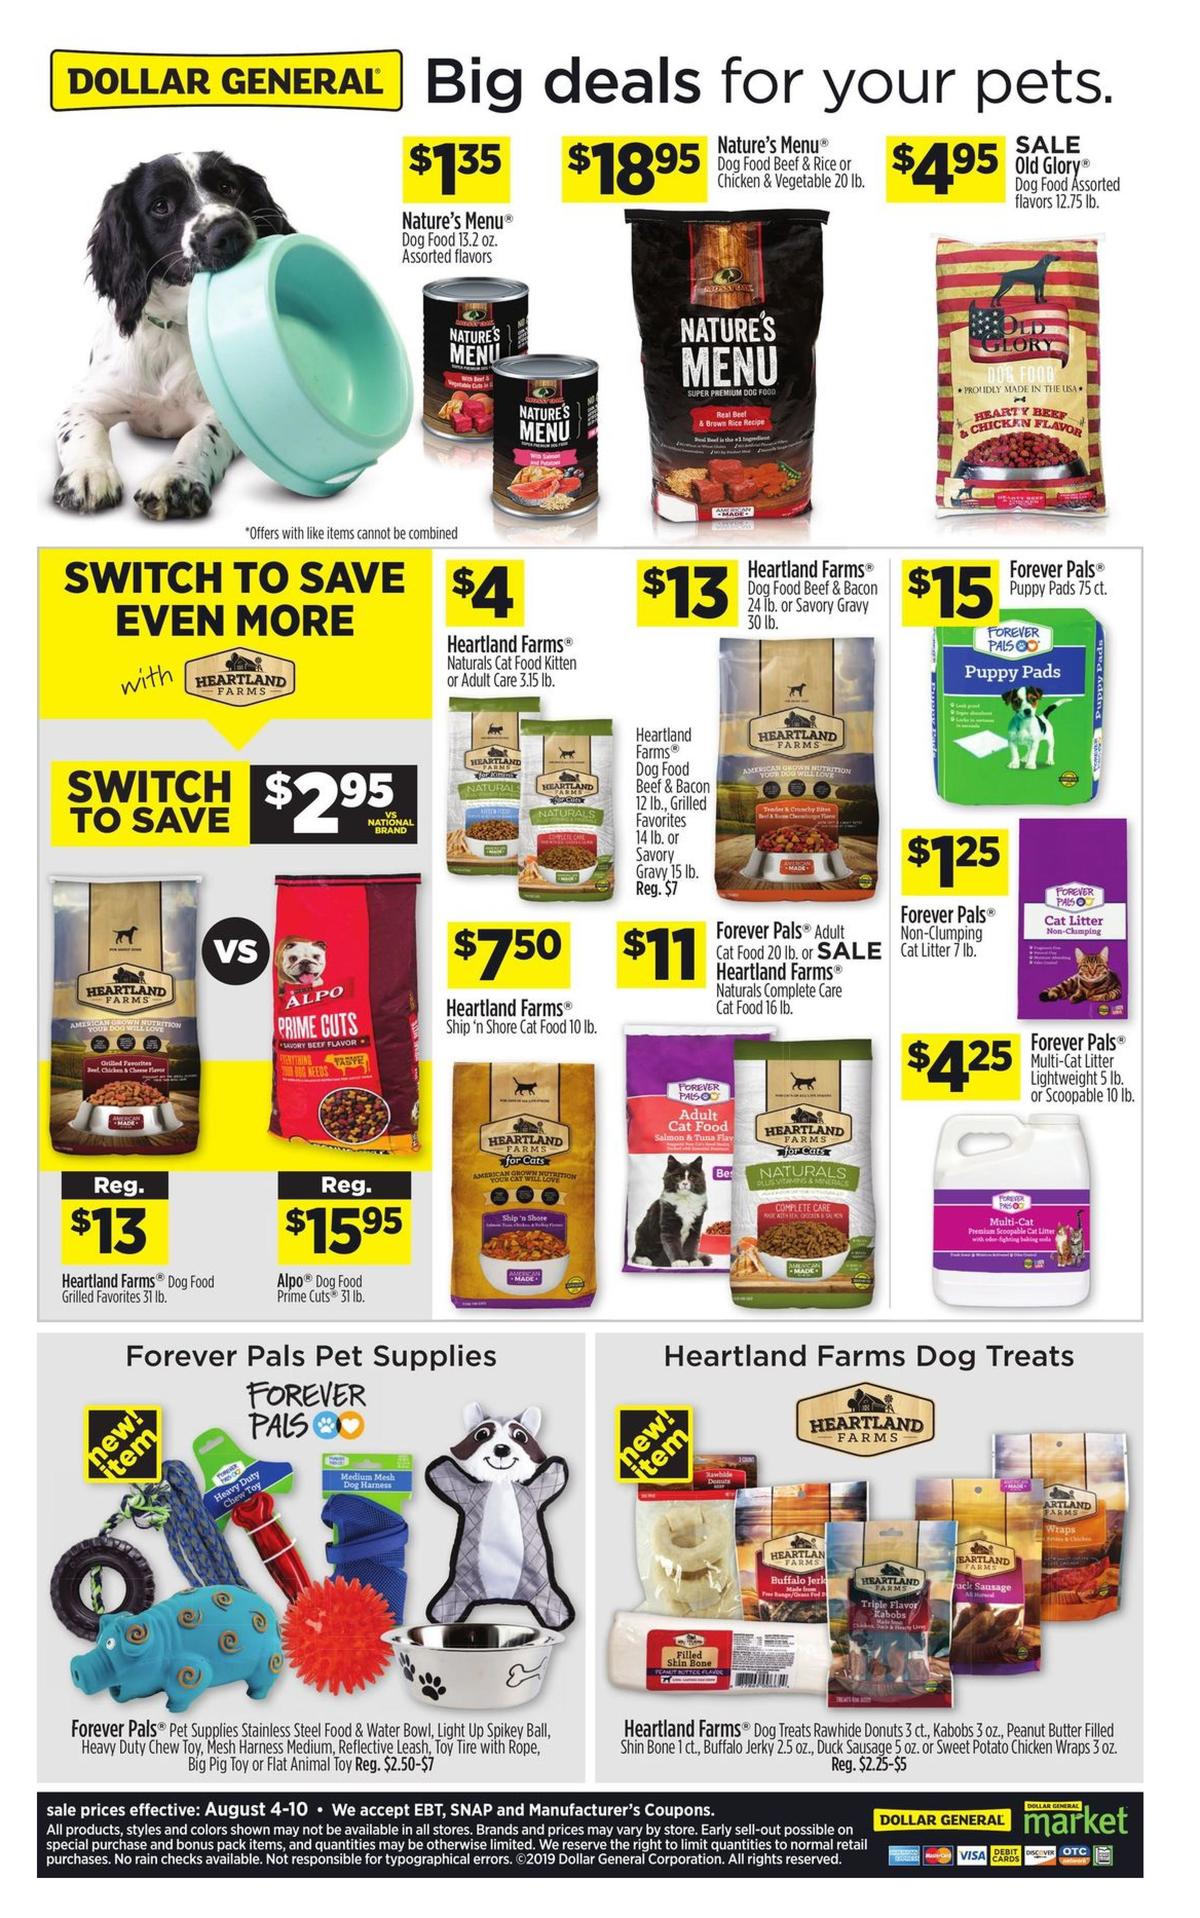 Dollar General Save On Back to School, Cleaning and Pet Supplies! Weekly Ad from August 4